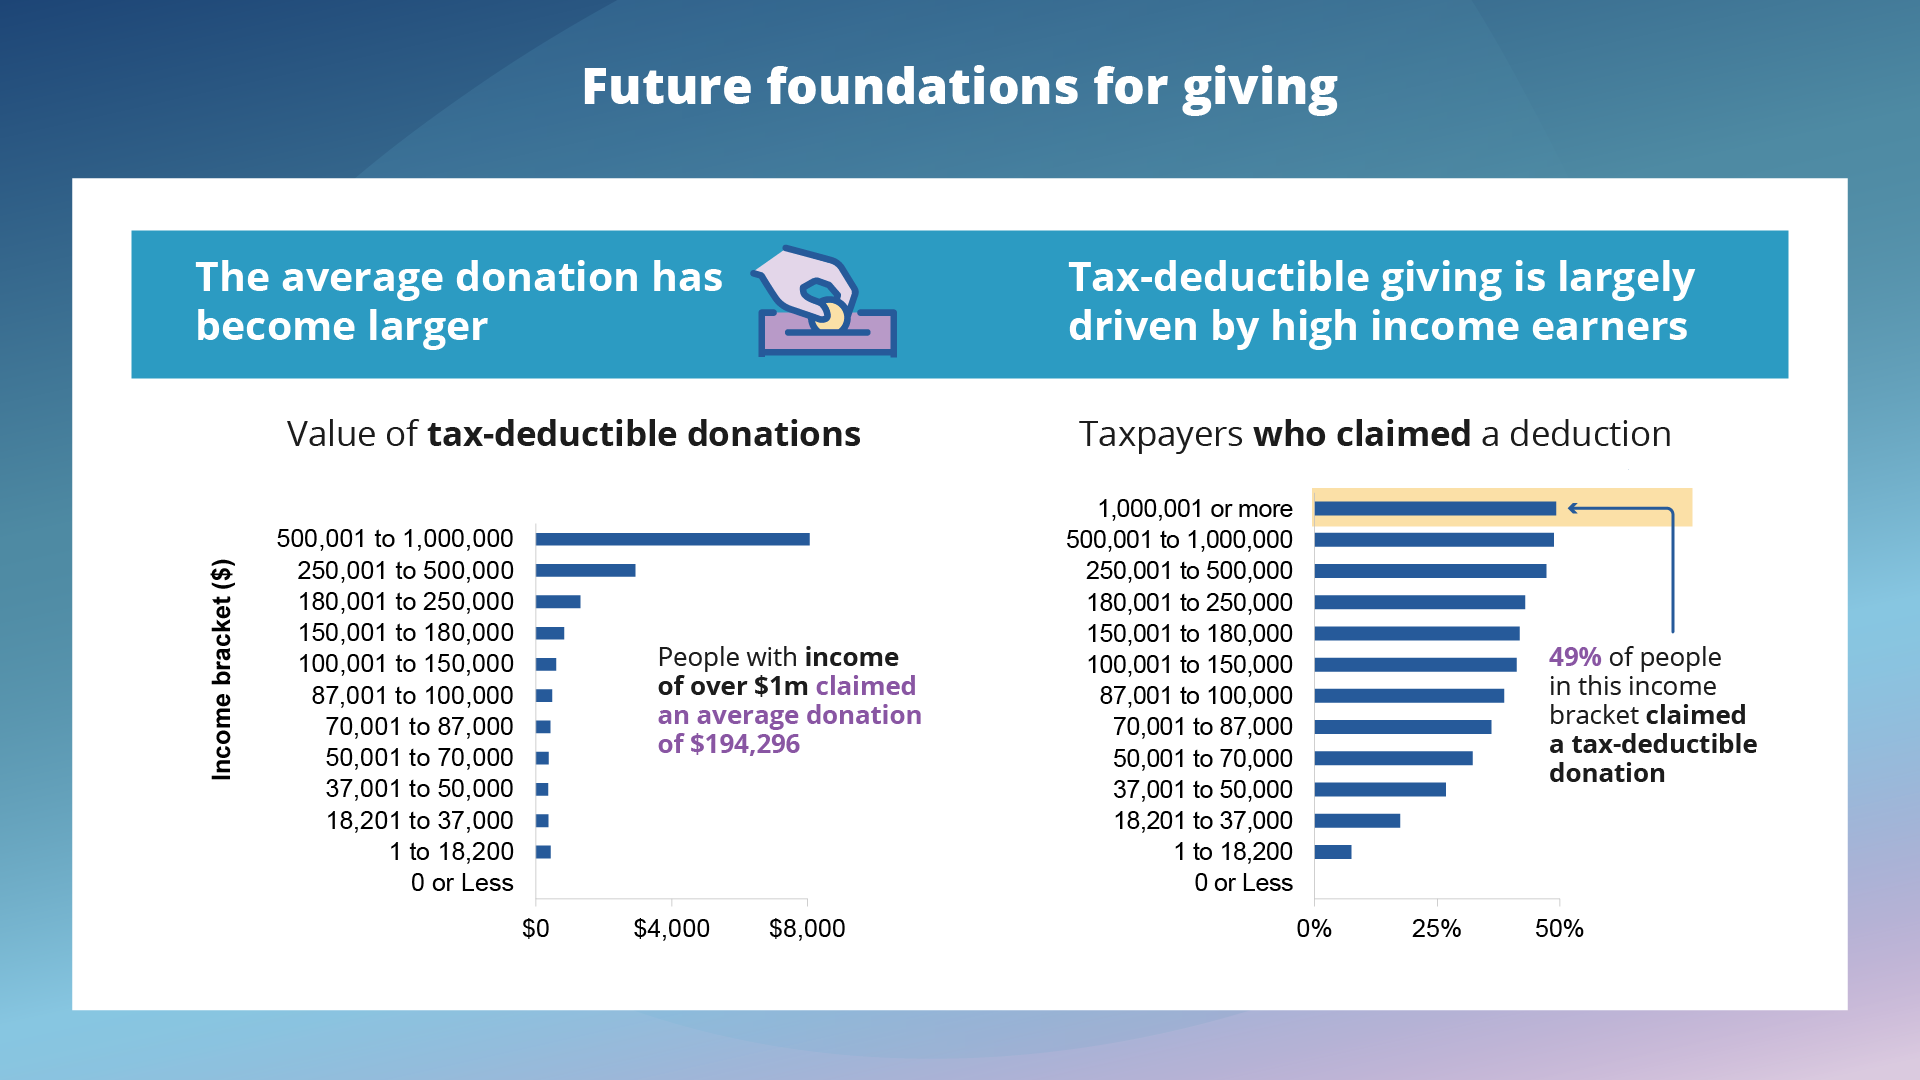 The average donation has become larger. Value of tax-deductible donations. People with income of over $1m claimed an average donation of $194,296. Tax-deductible giving is largely driven by high income earners. Taxpayers who claimed a deduction. 49% of people in this income bracket claimed a tax-deductible donation.